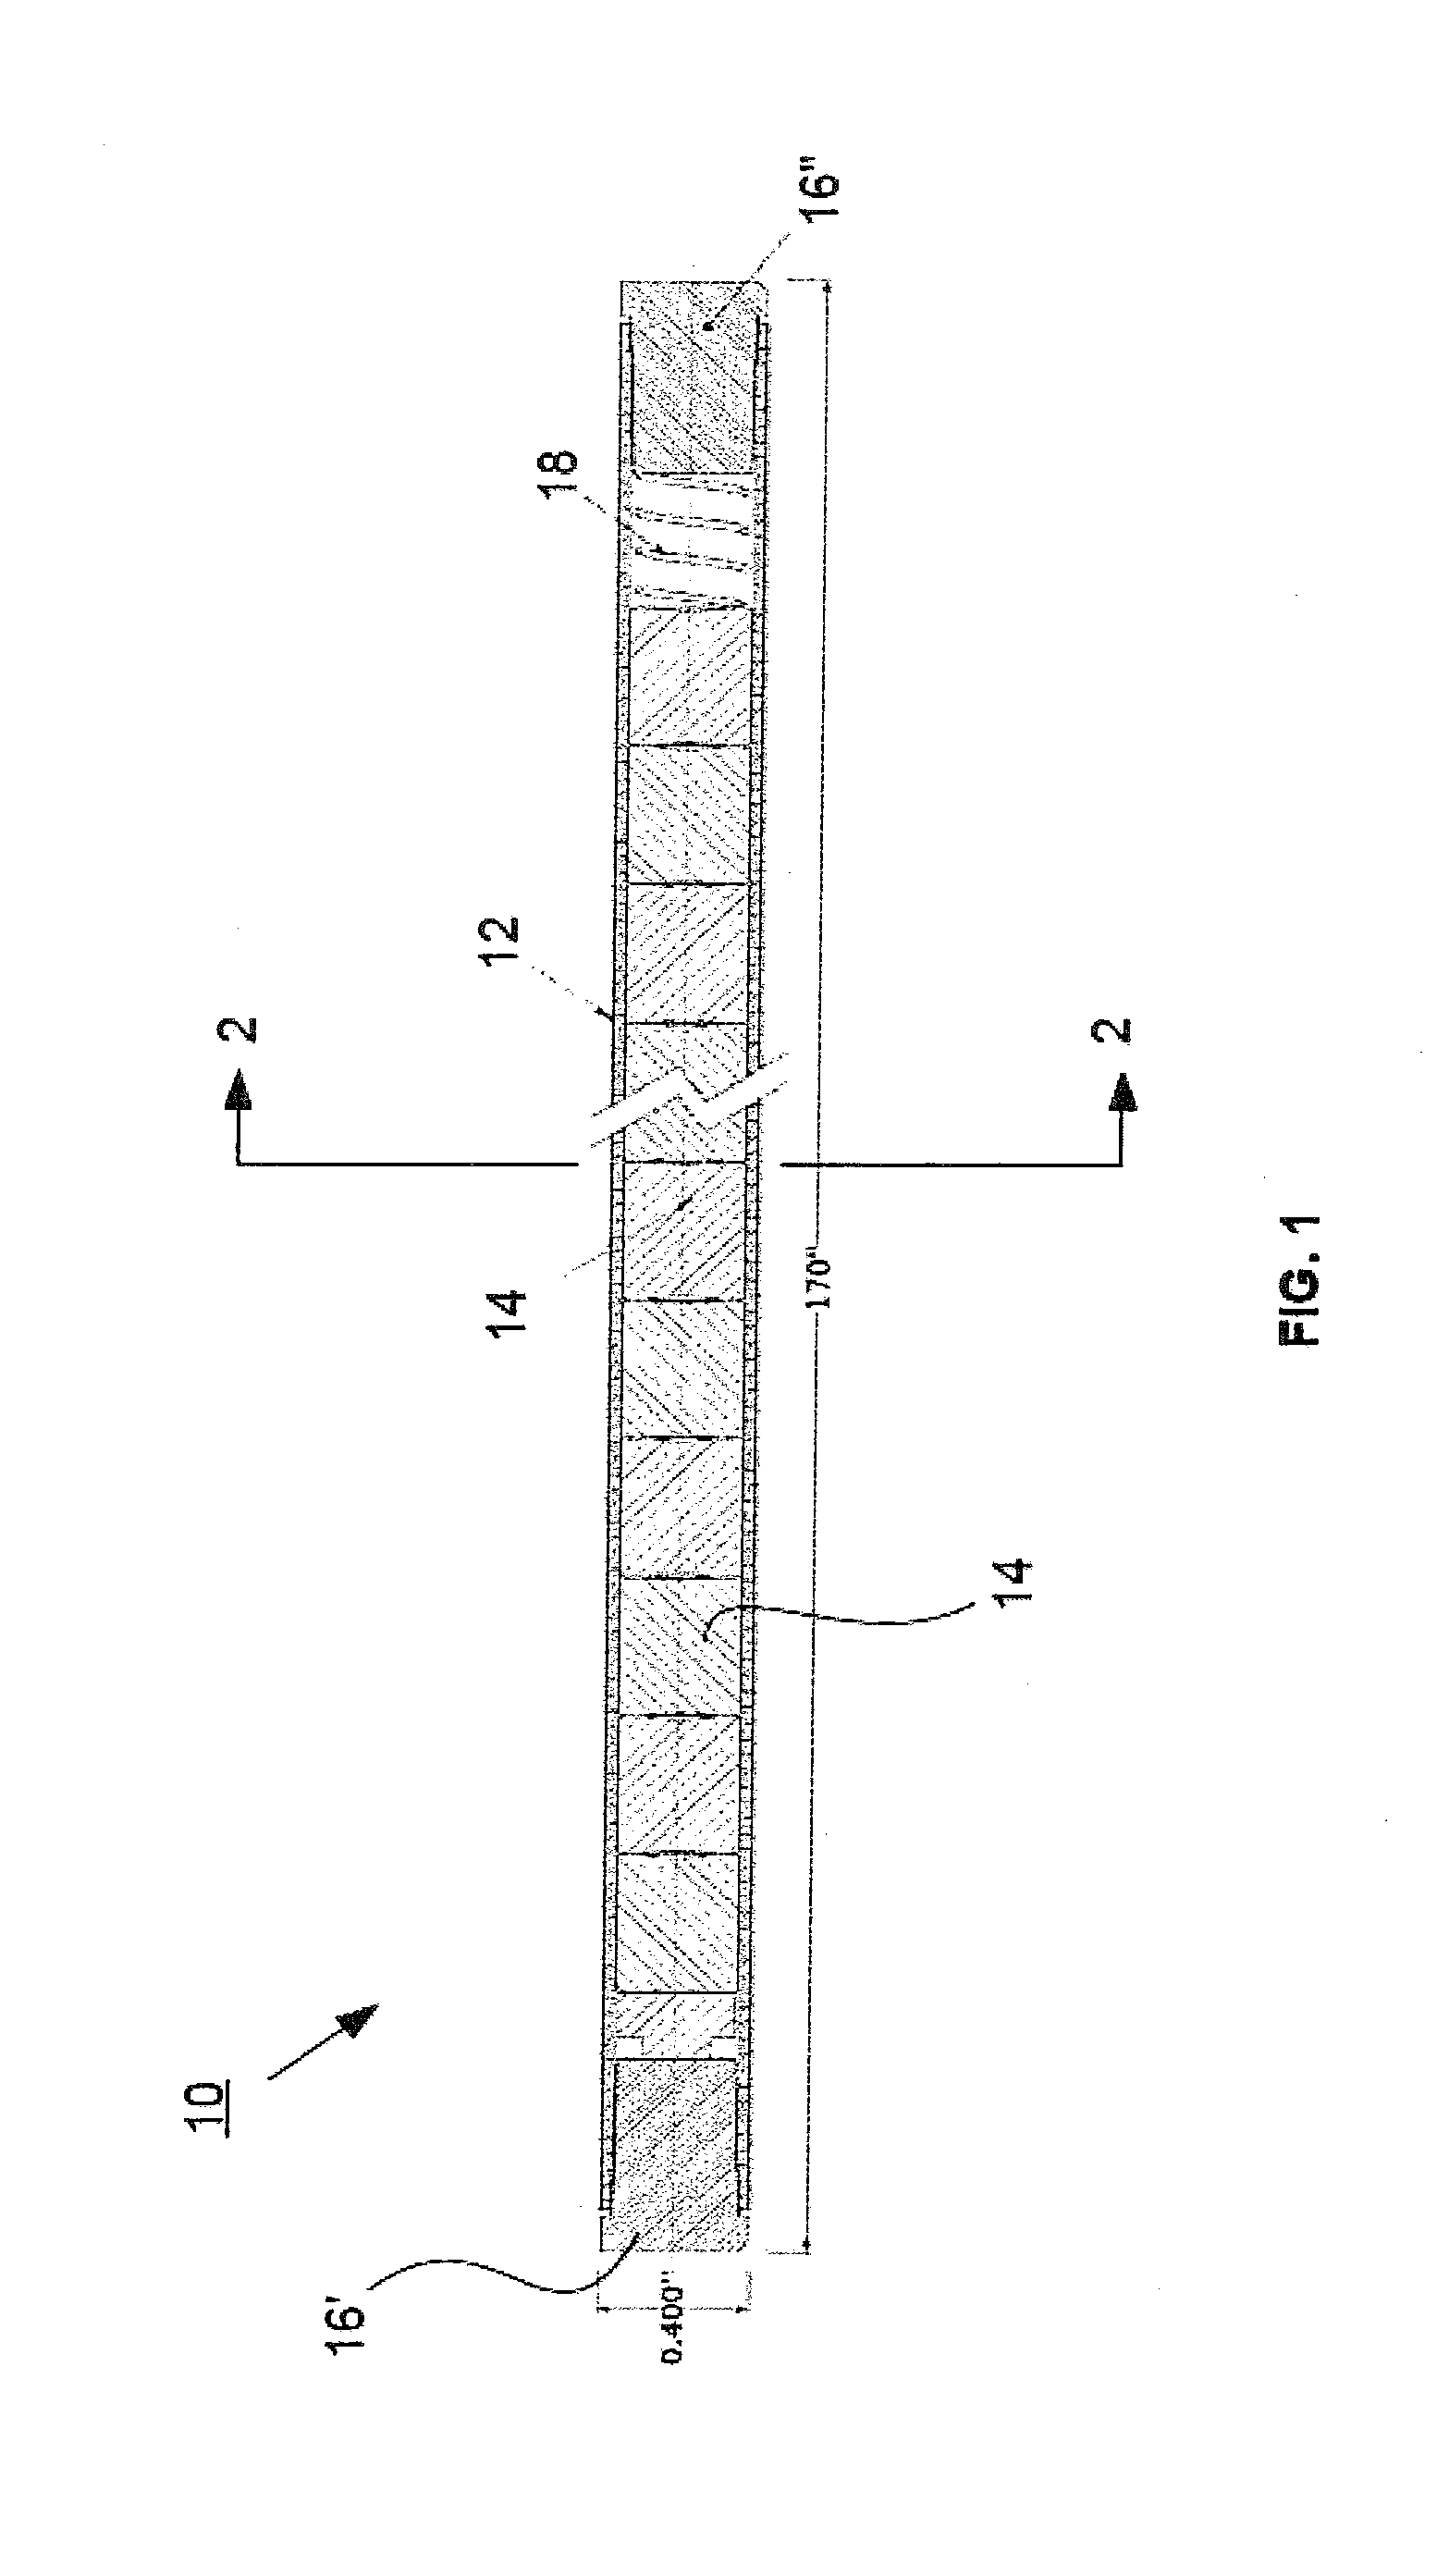 Silicon carbide multilayered cladding and nuclear reactor fuel element for use in water-cooled nuclear power reactors